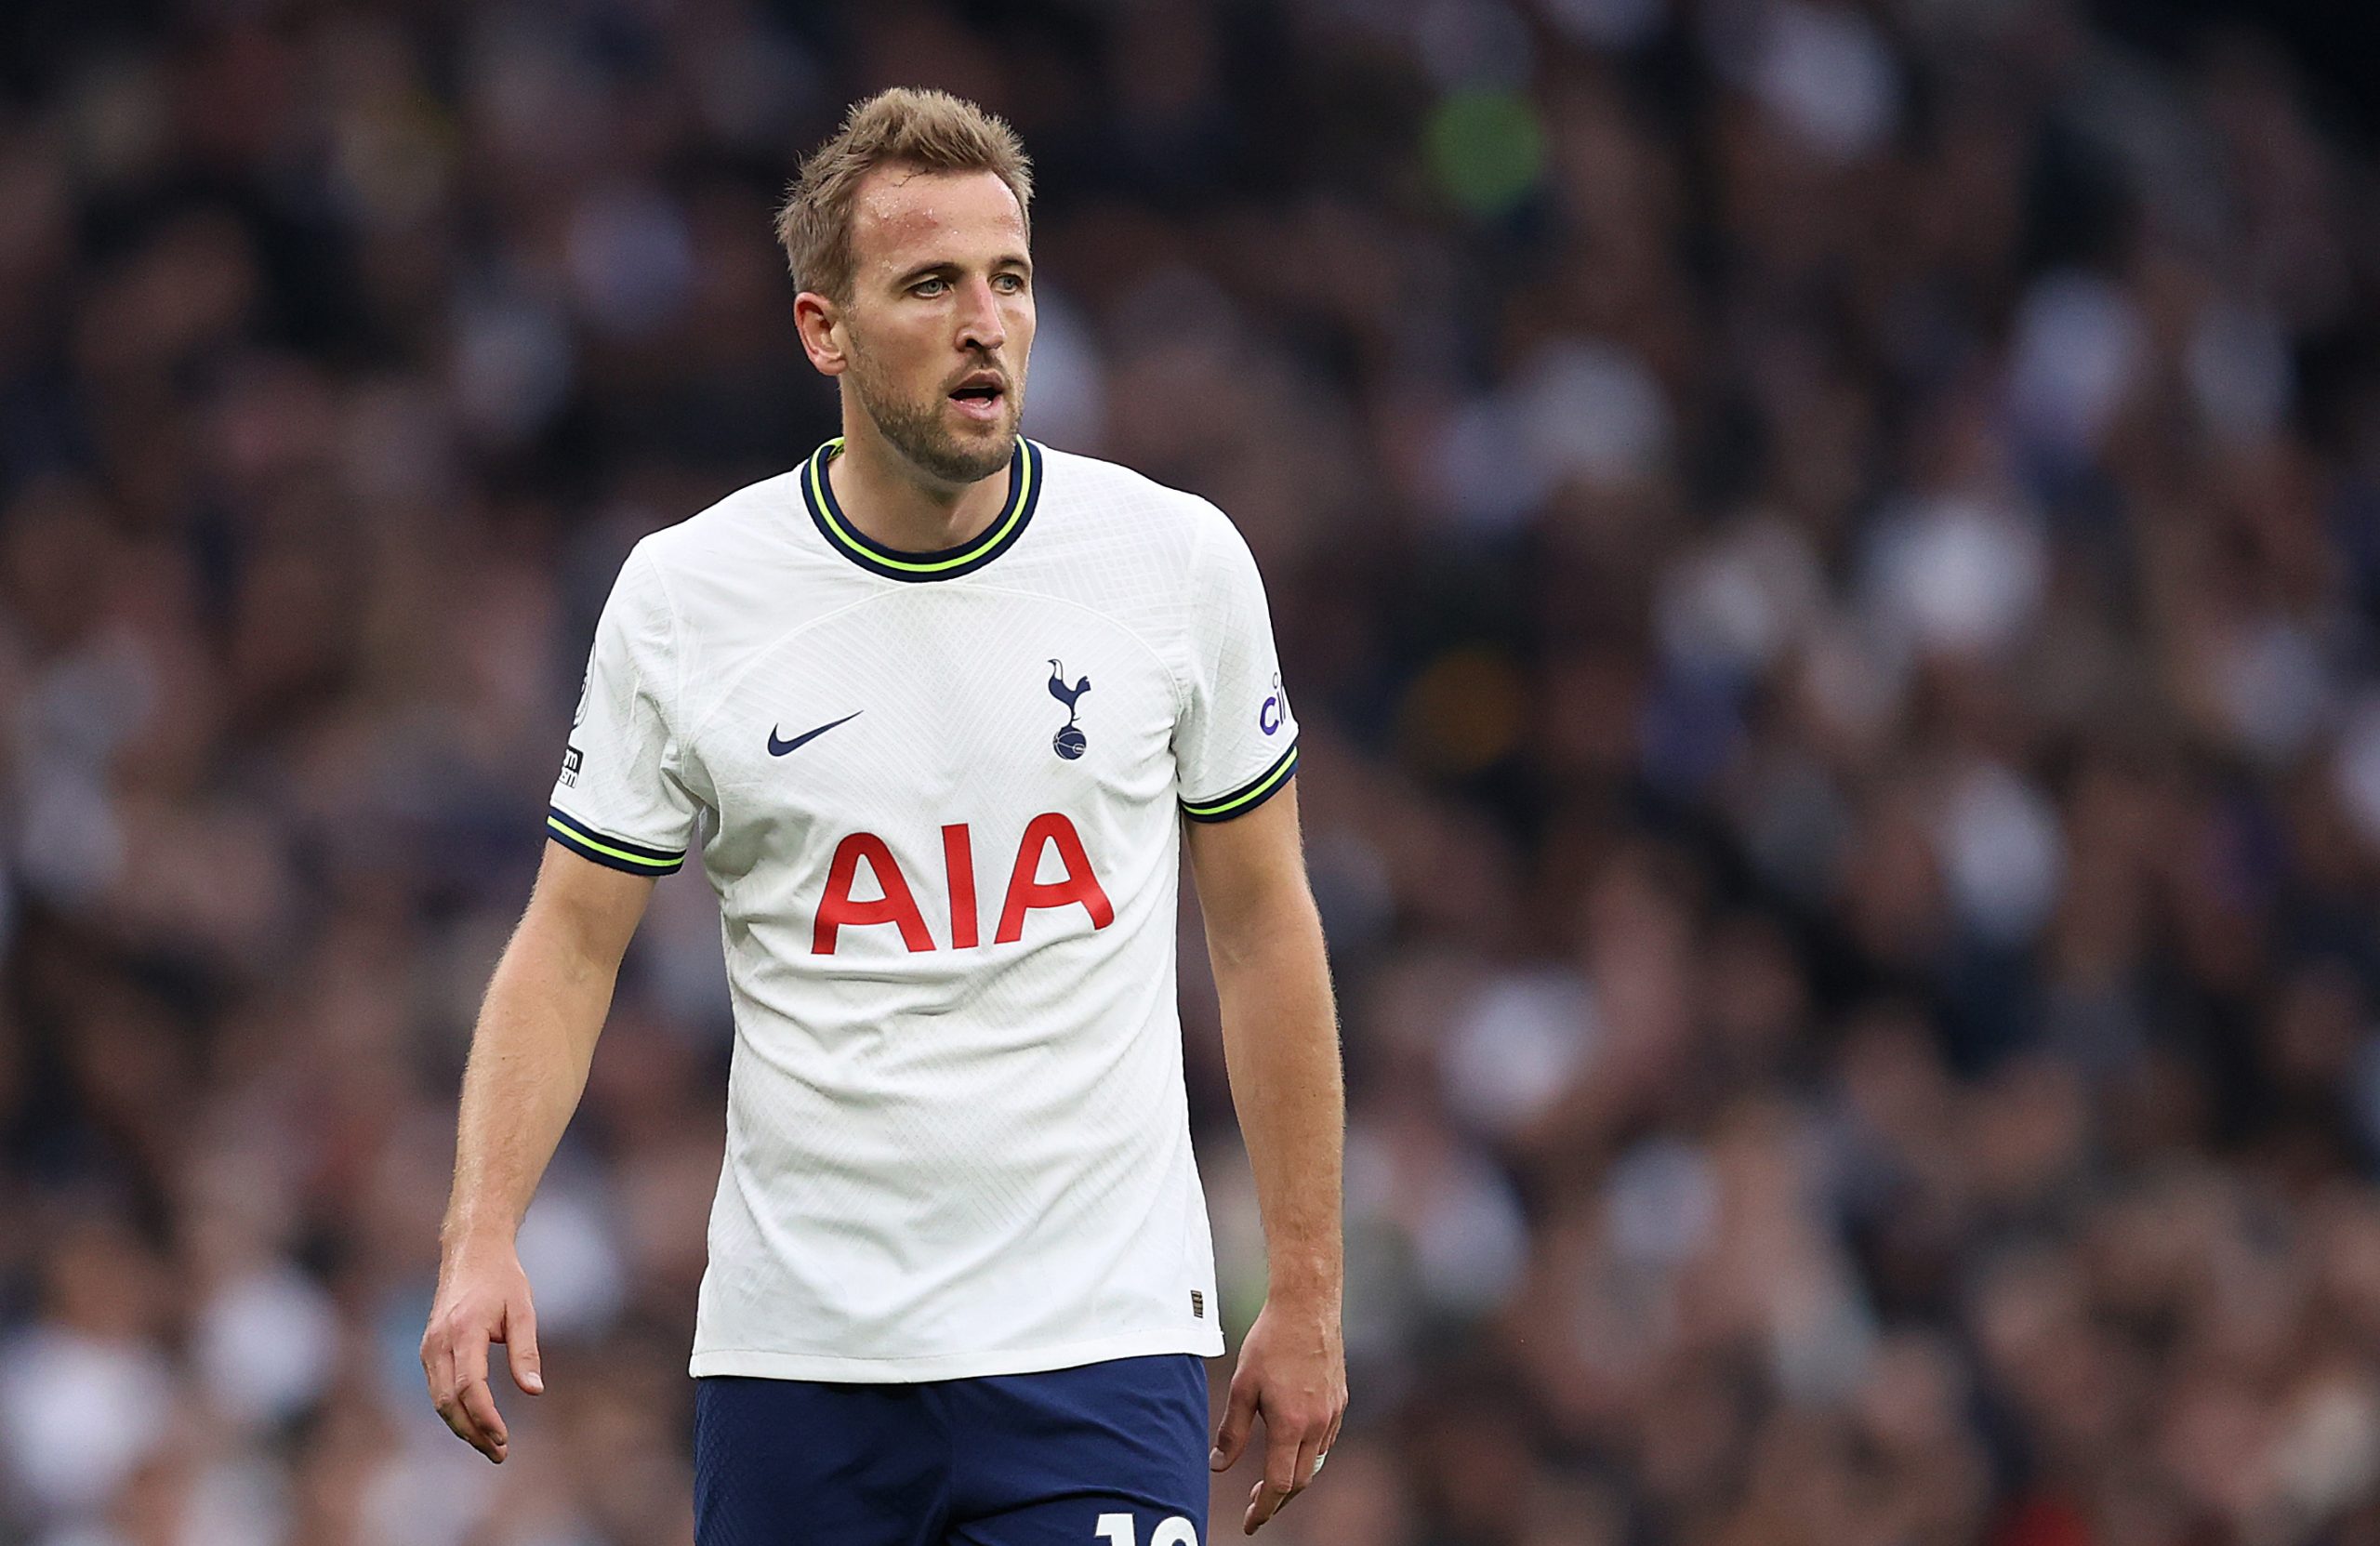 Paul Robinson believes that it will be 'huge' for Tottenham Hotspur if Harry Kane signs a new deal.